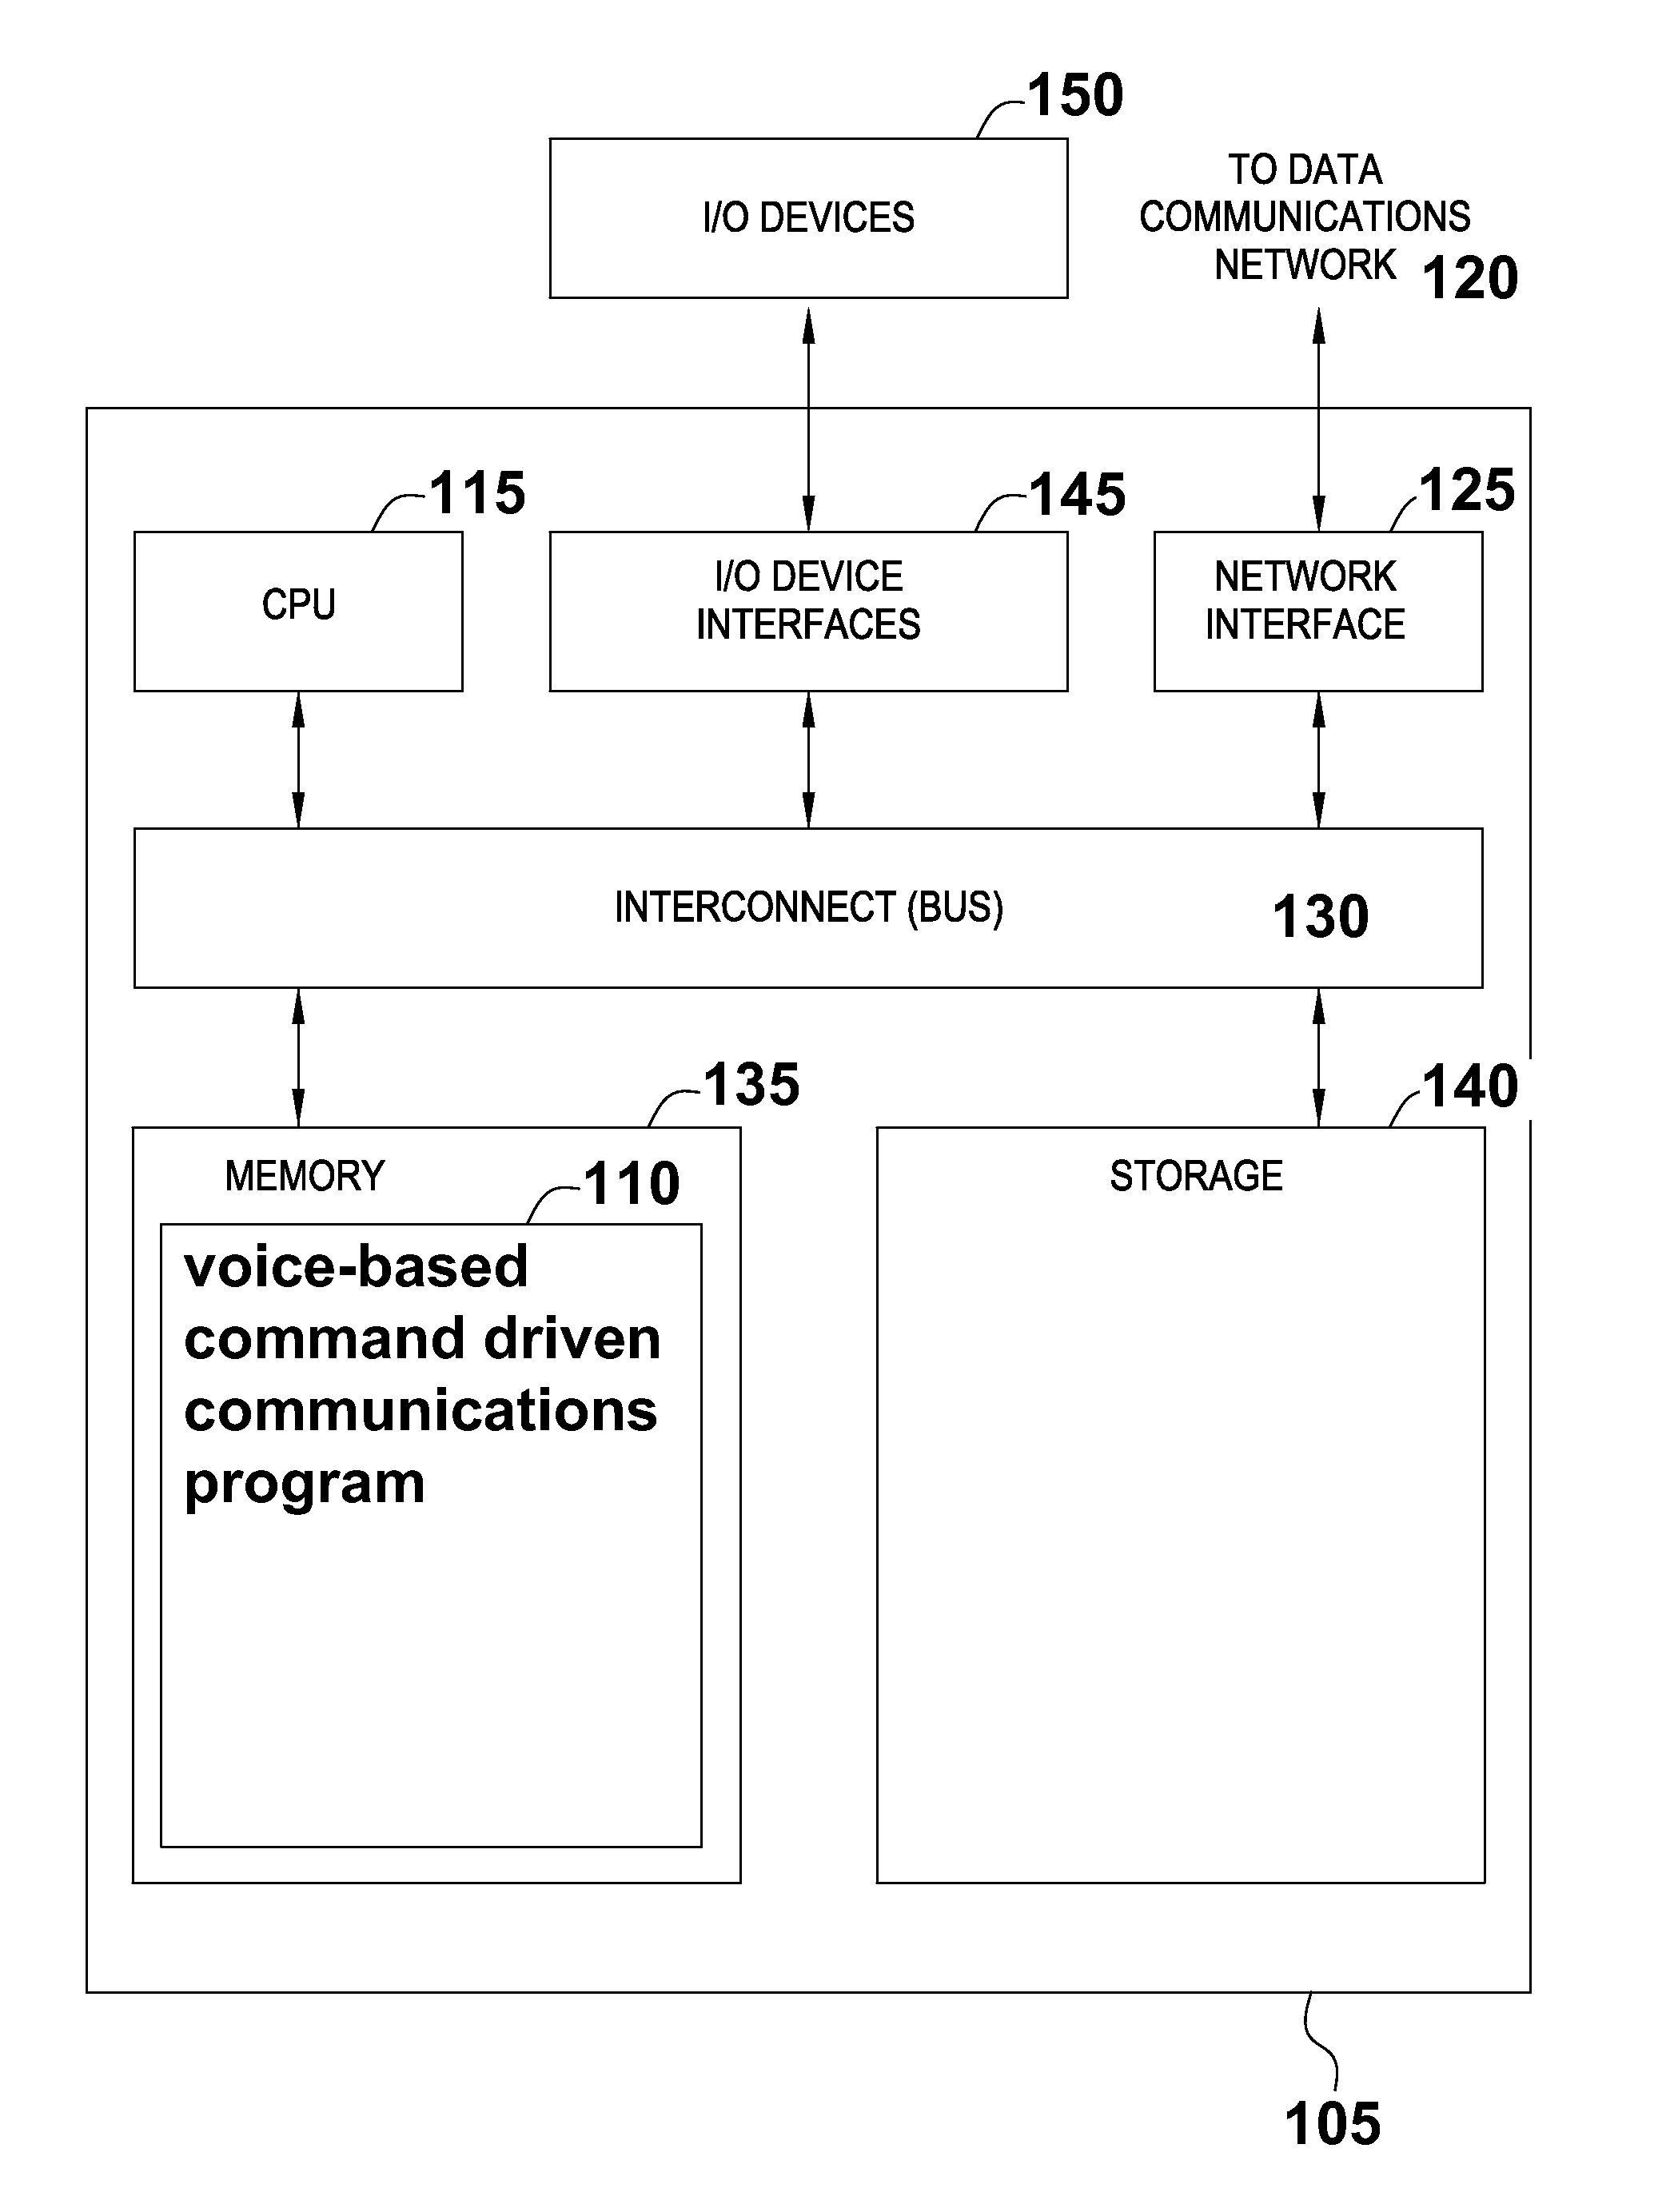 Voice-based command driven computer implemented method